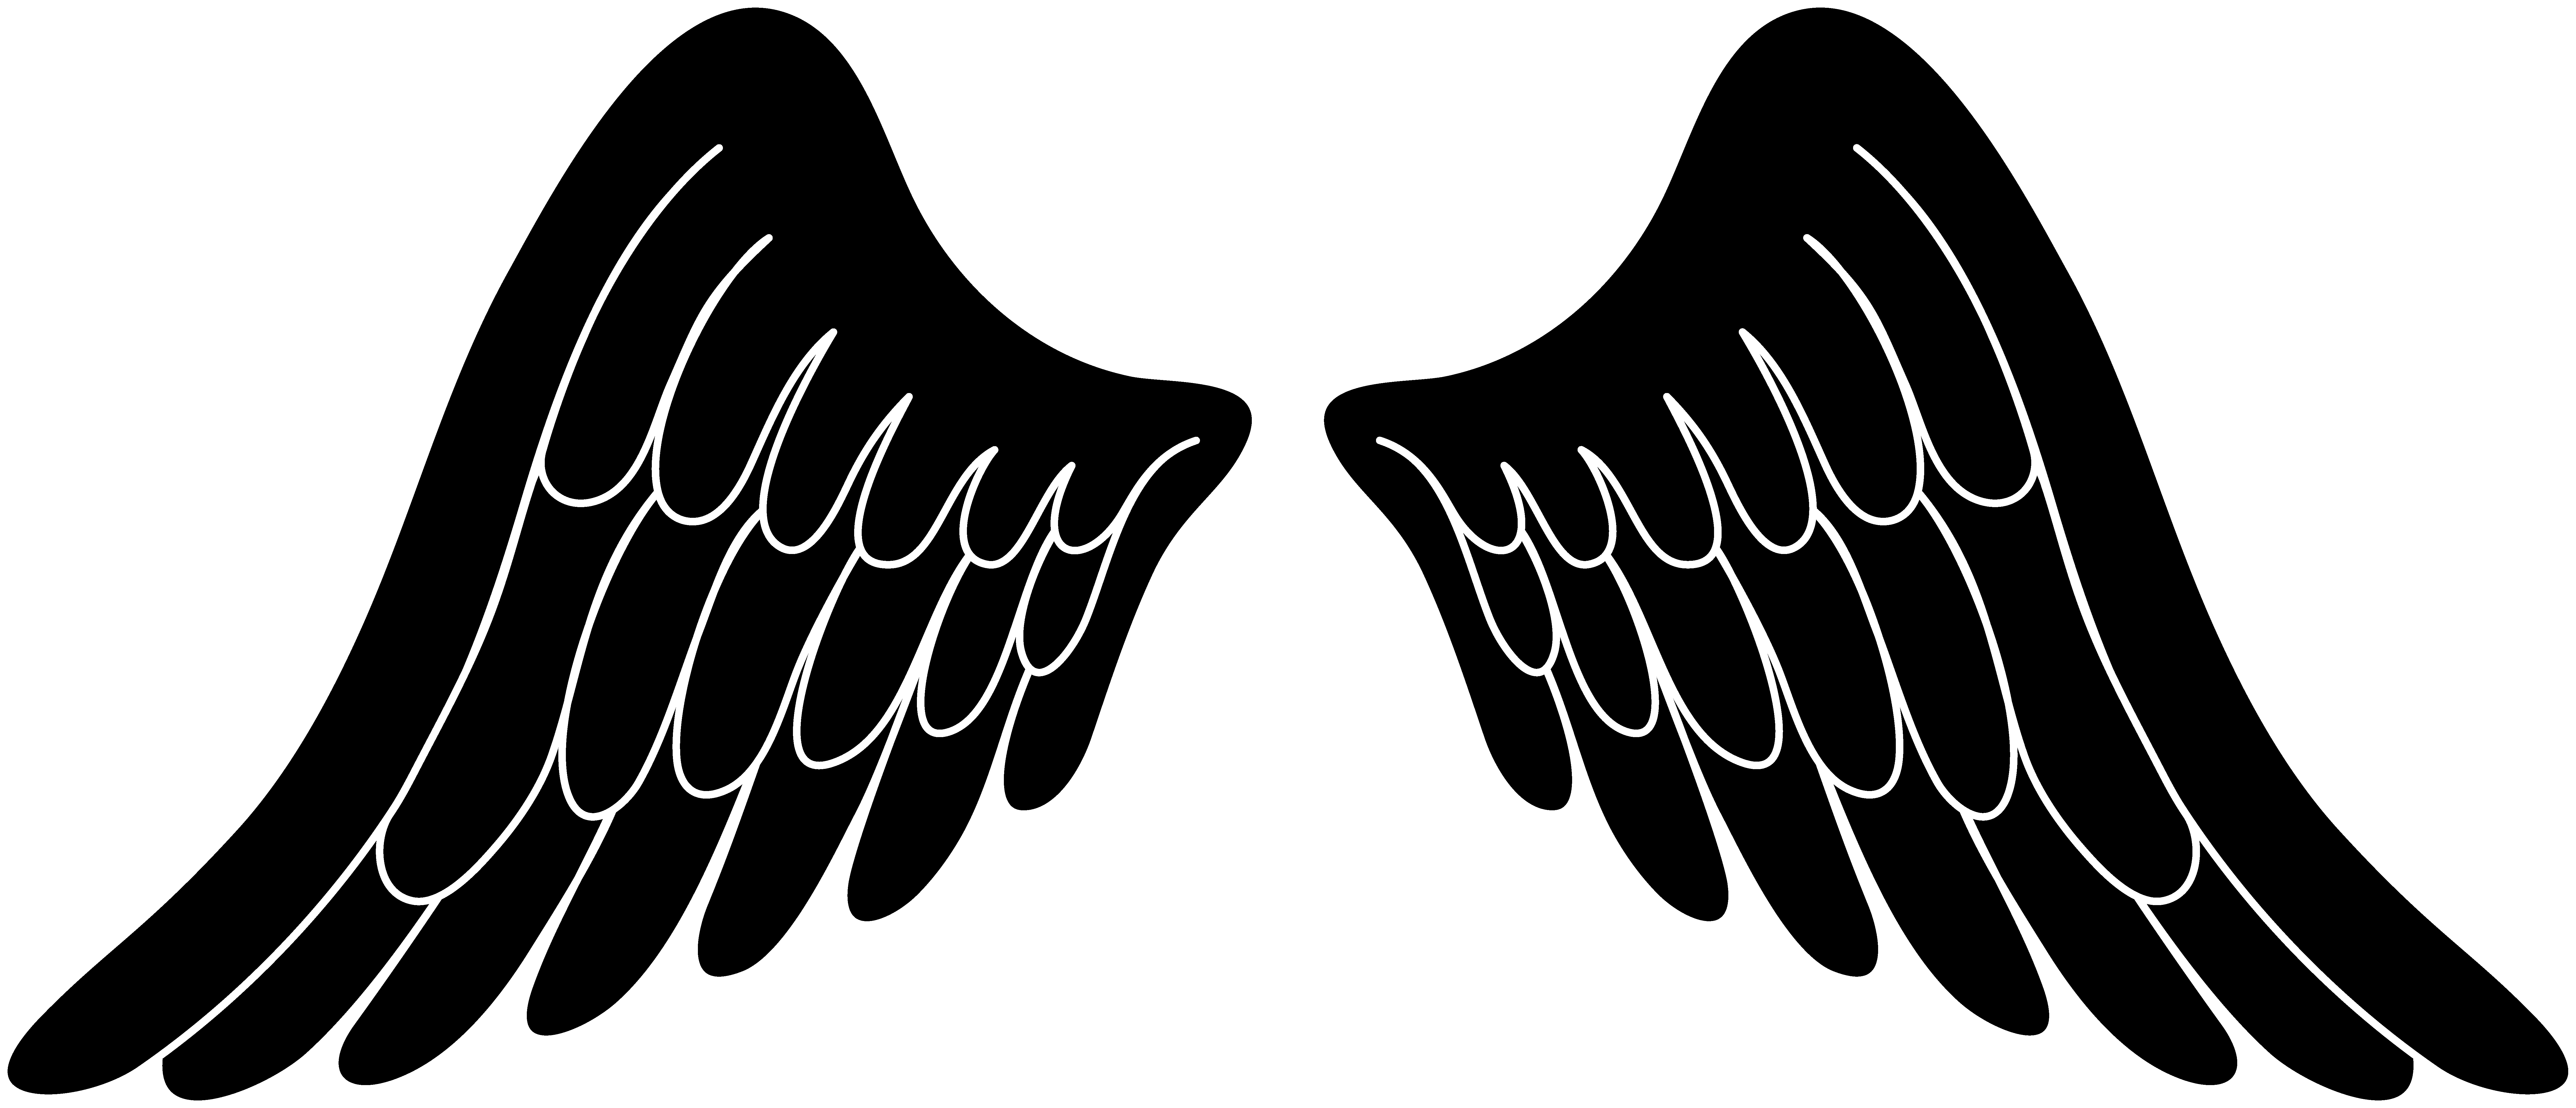 Wings Clip Art. Wings cliparts